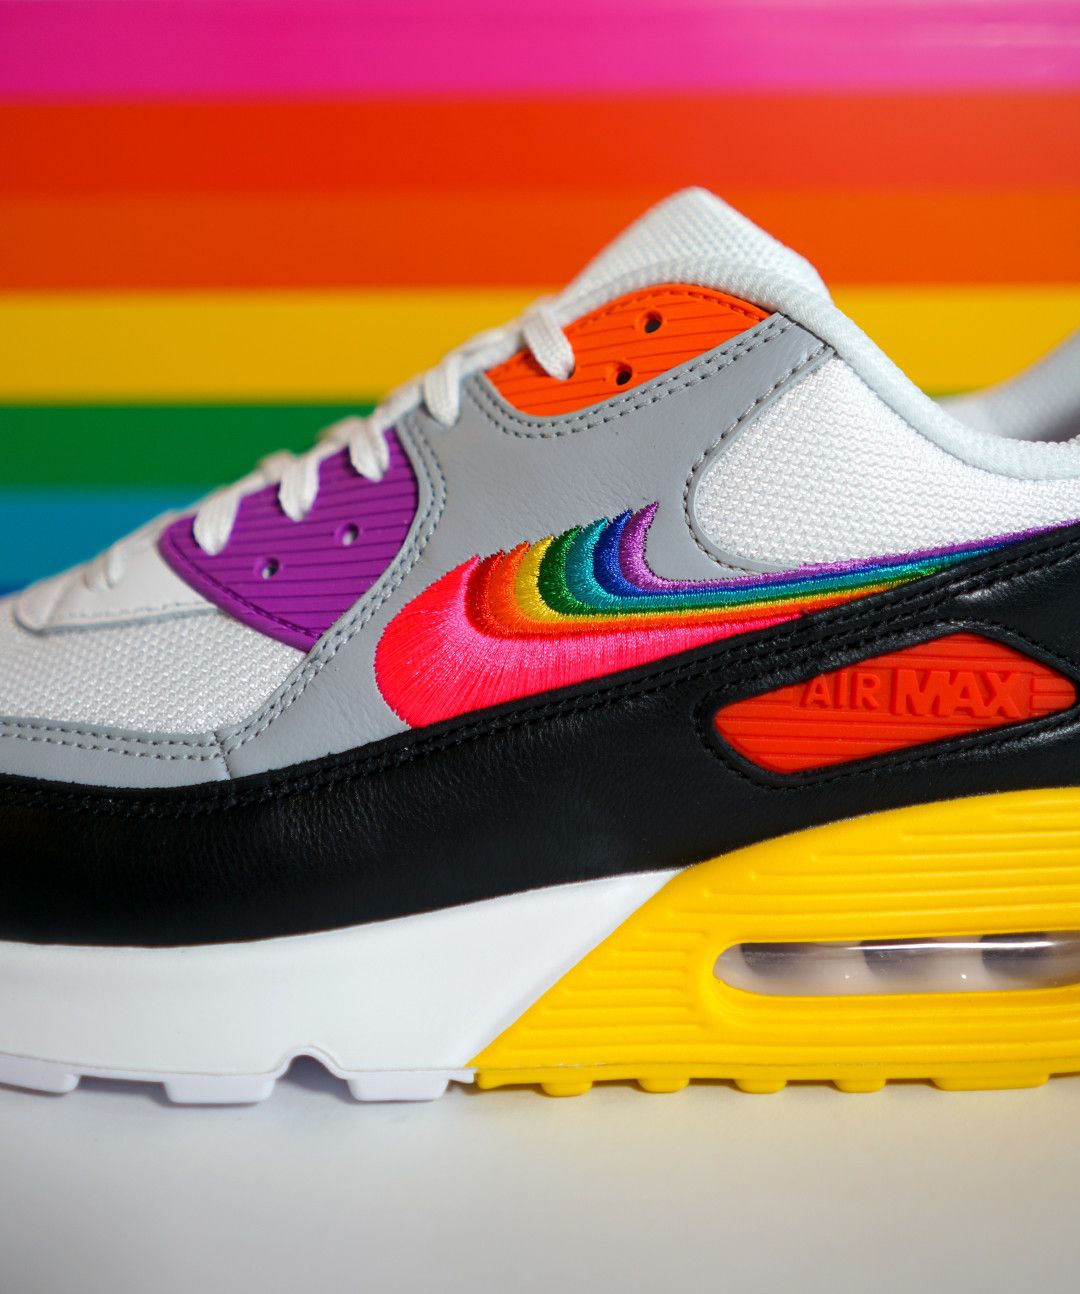 Nike BETRUE Air Max 90 and Tailwind 79 Sneakers - The Story of 